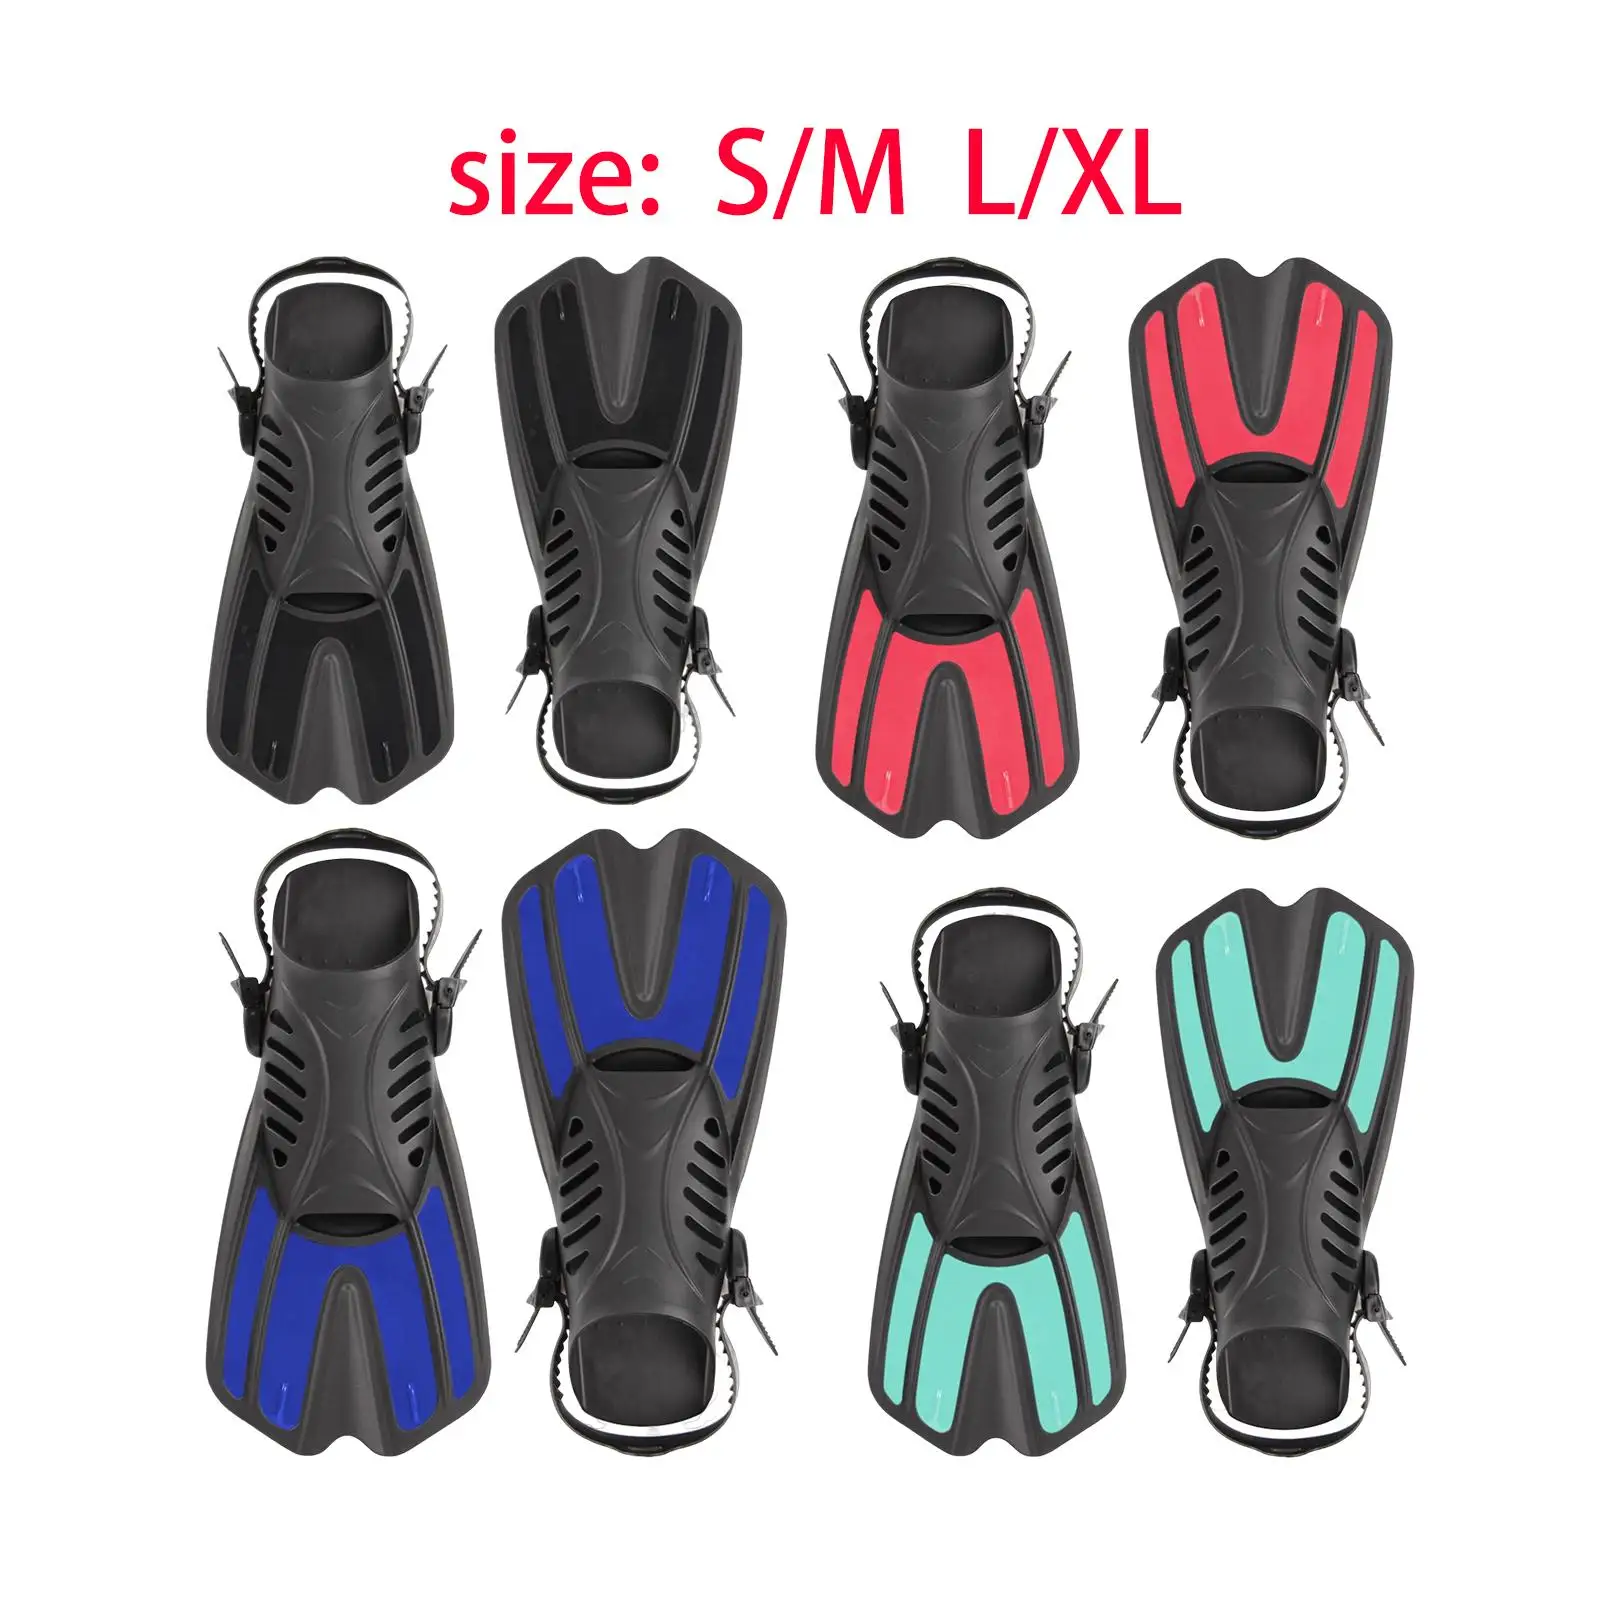 Scuba Diving Swimming Flippers Snorkeling Swiming Training Flippers Adjustable Open Heel Free Diving Equipment Gear for Adults